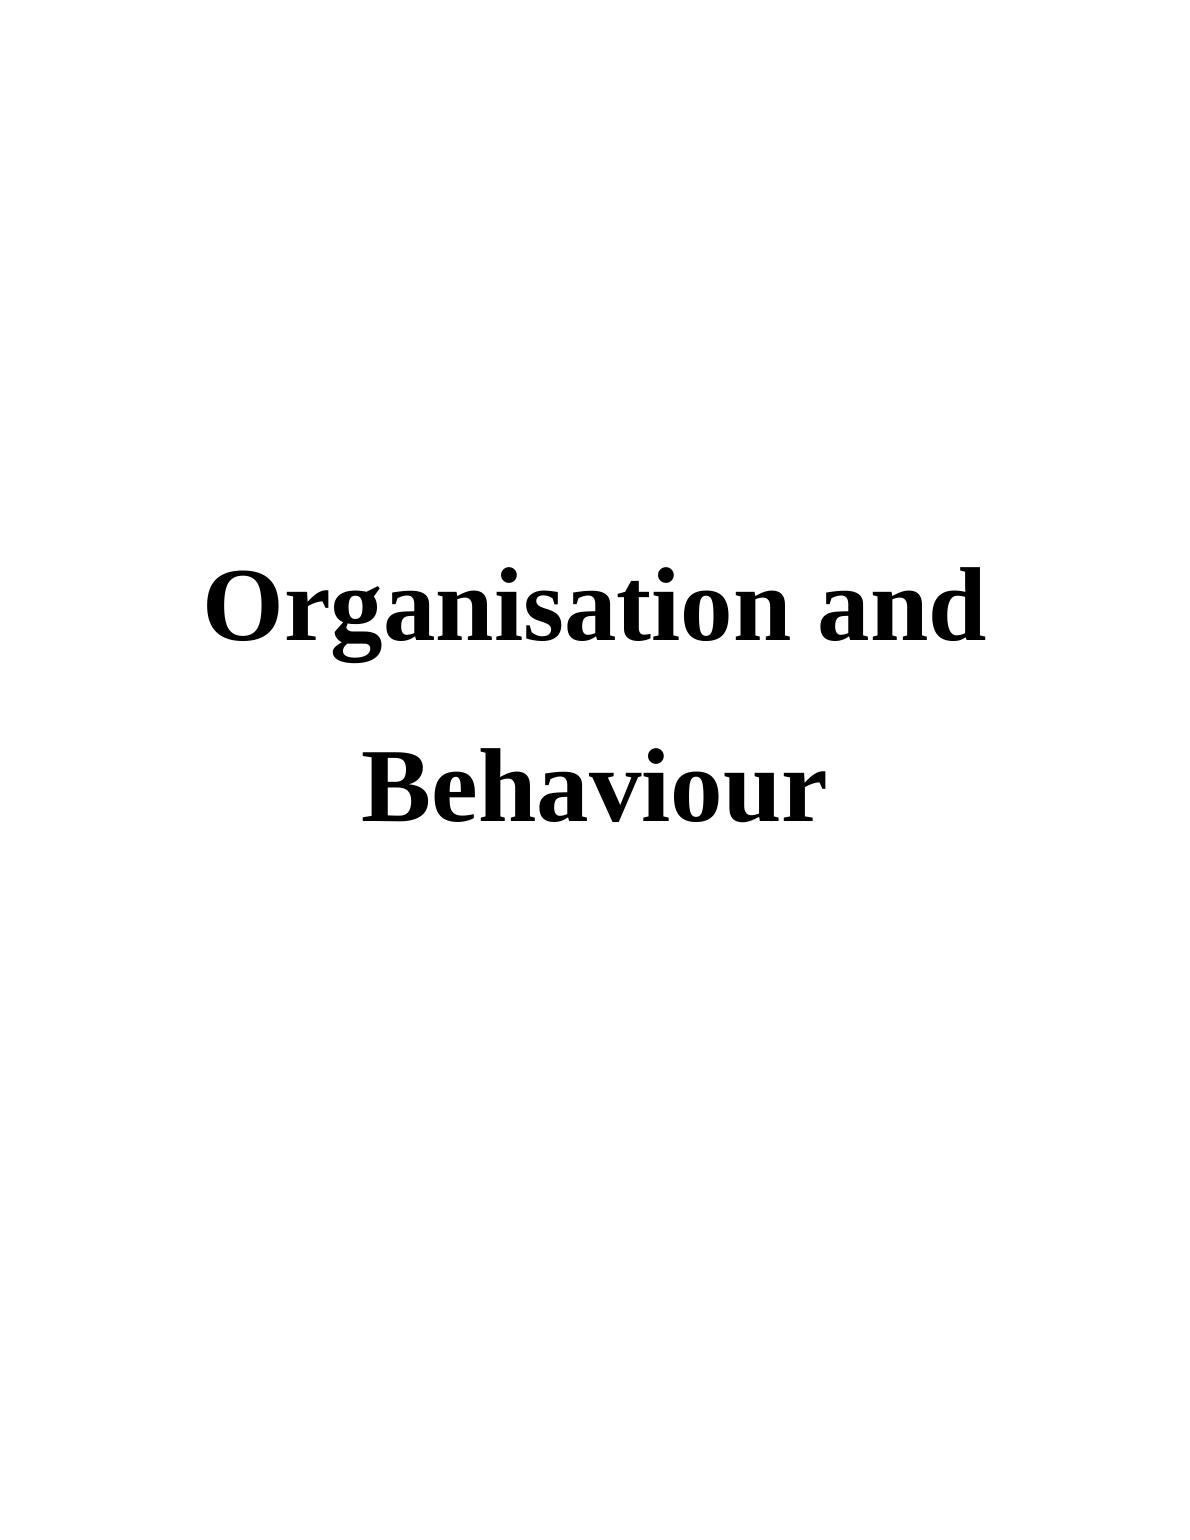 Organisation and Behaviour of the City College and Enterprise rent-a-car : Report_1